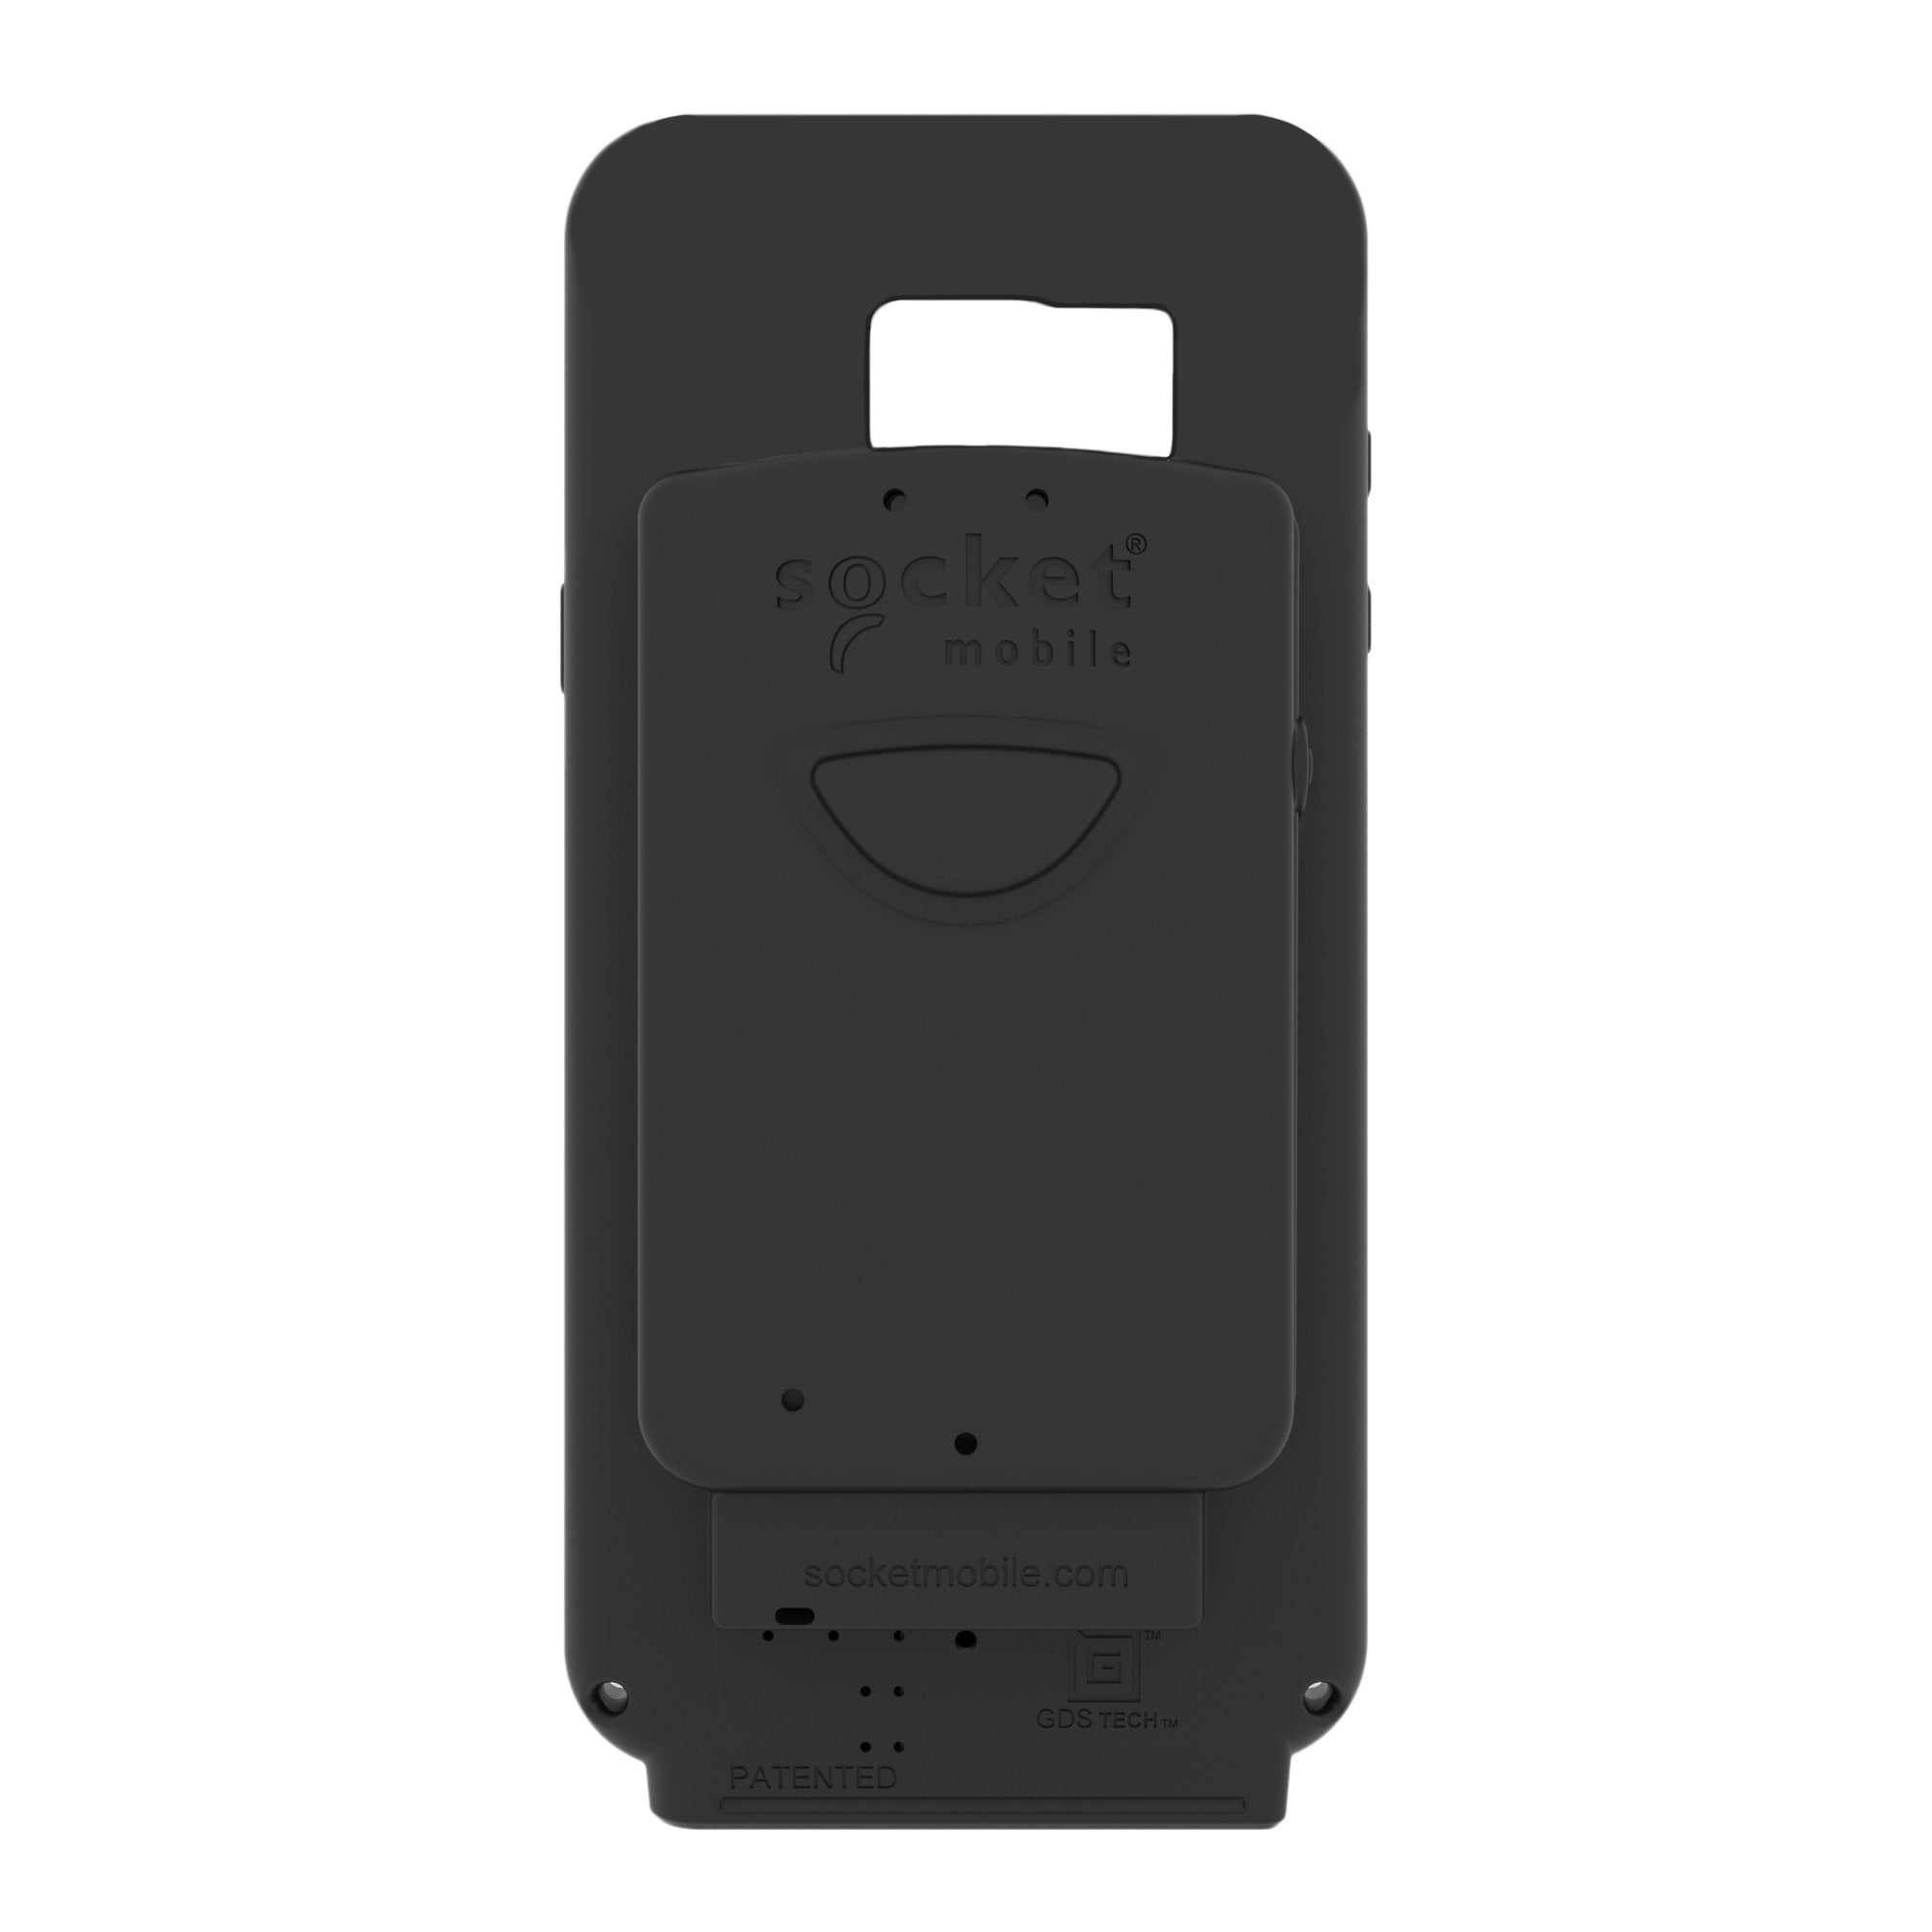 Durasled Case Only For Samsung Galaxy Socket Mobile